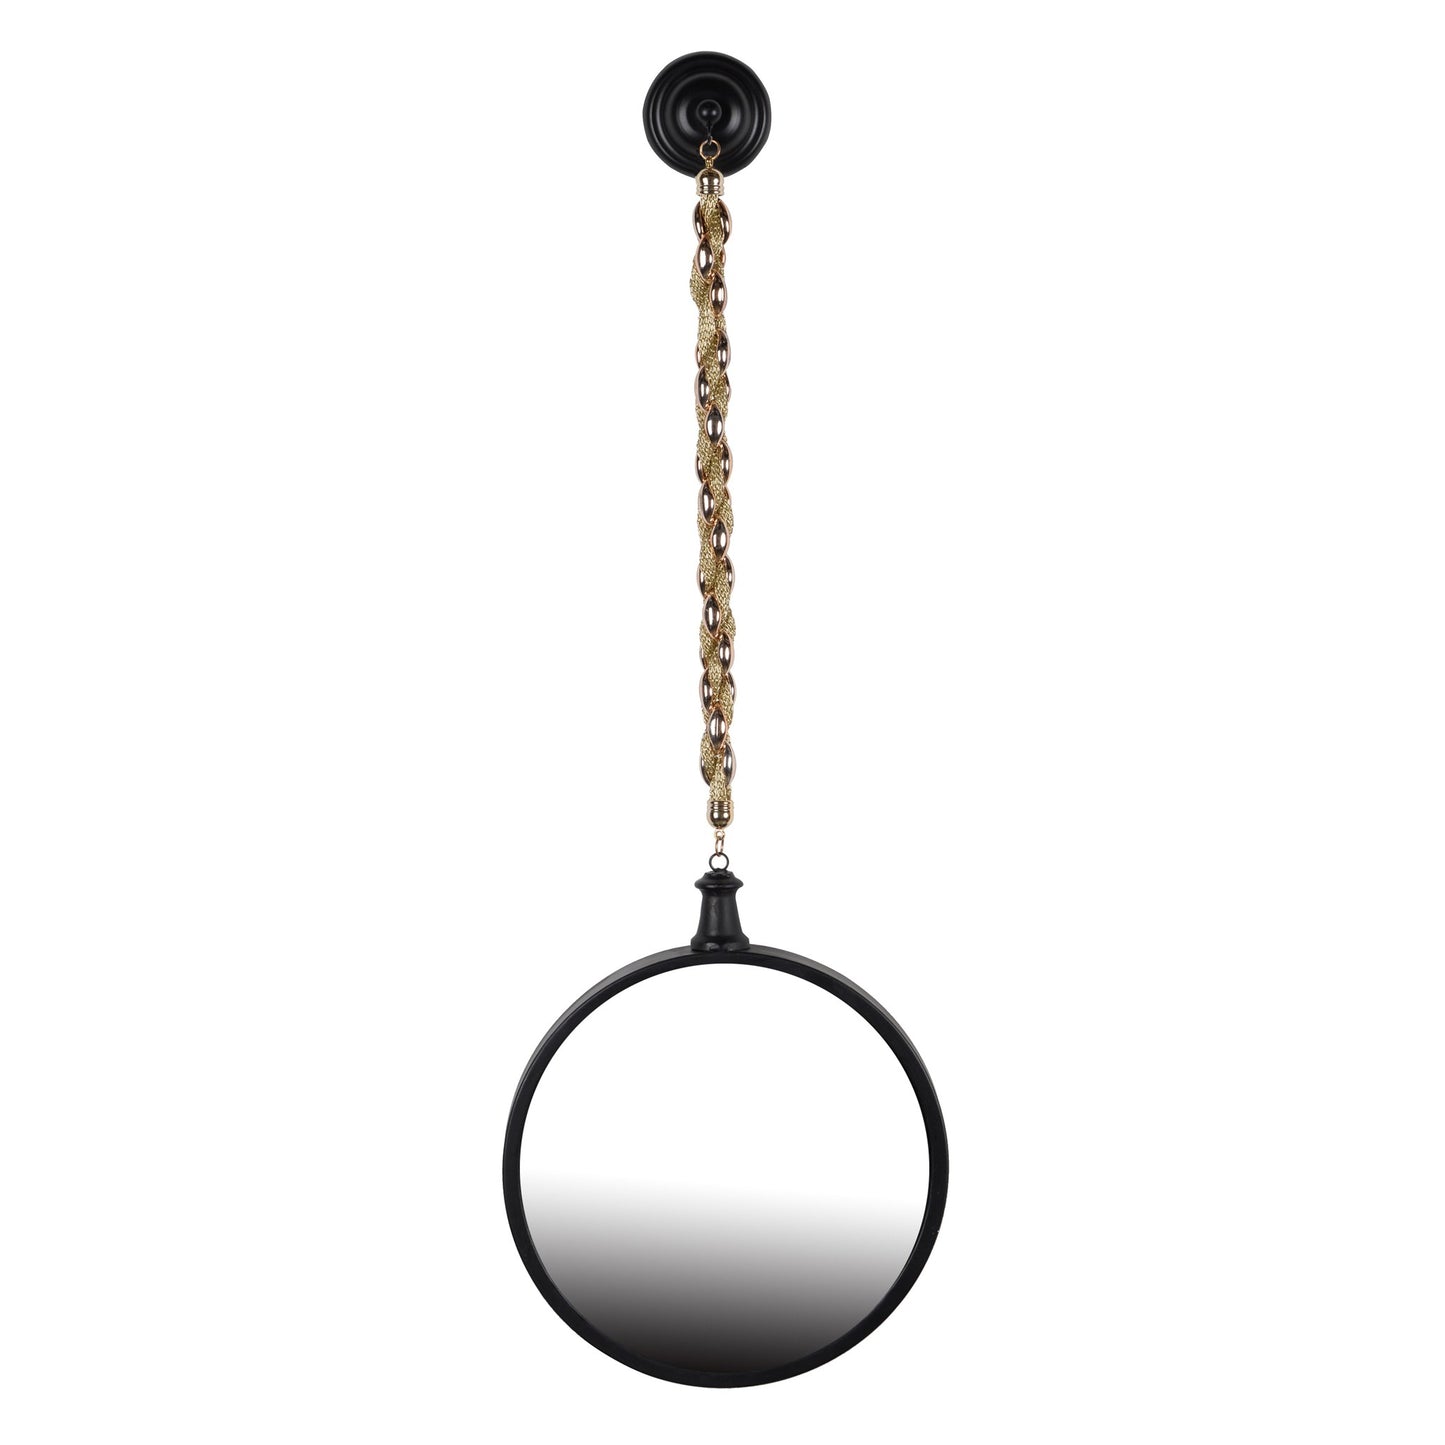 Benzara 30" Black and Gold Round Metal Wall Mirror With Chain Hanger